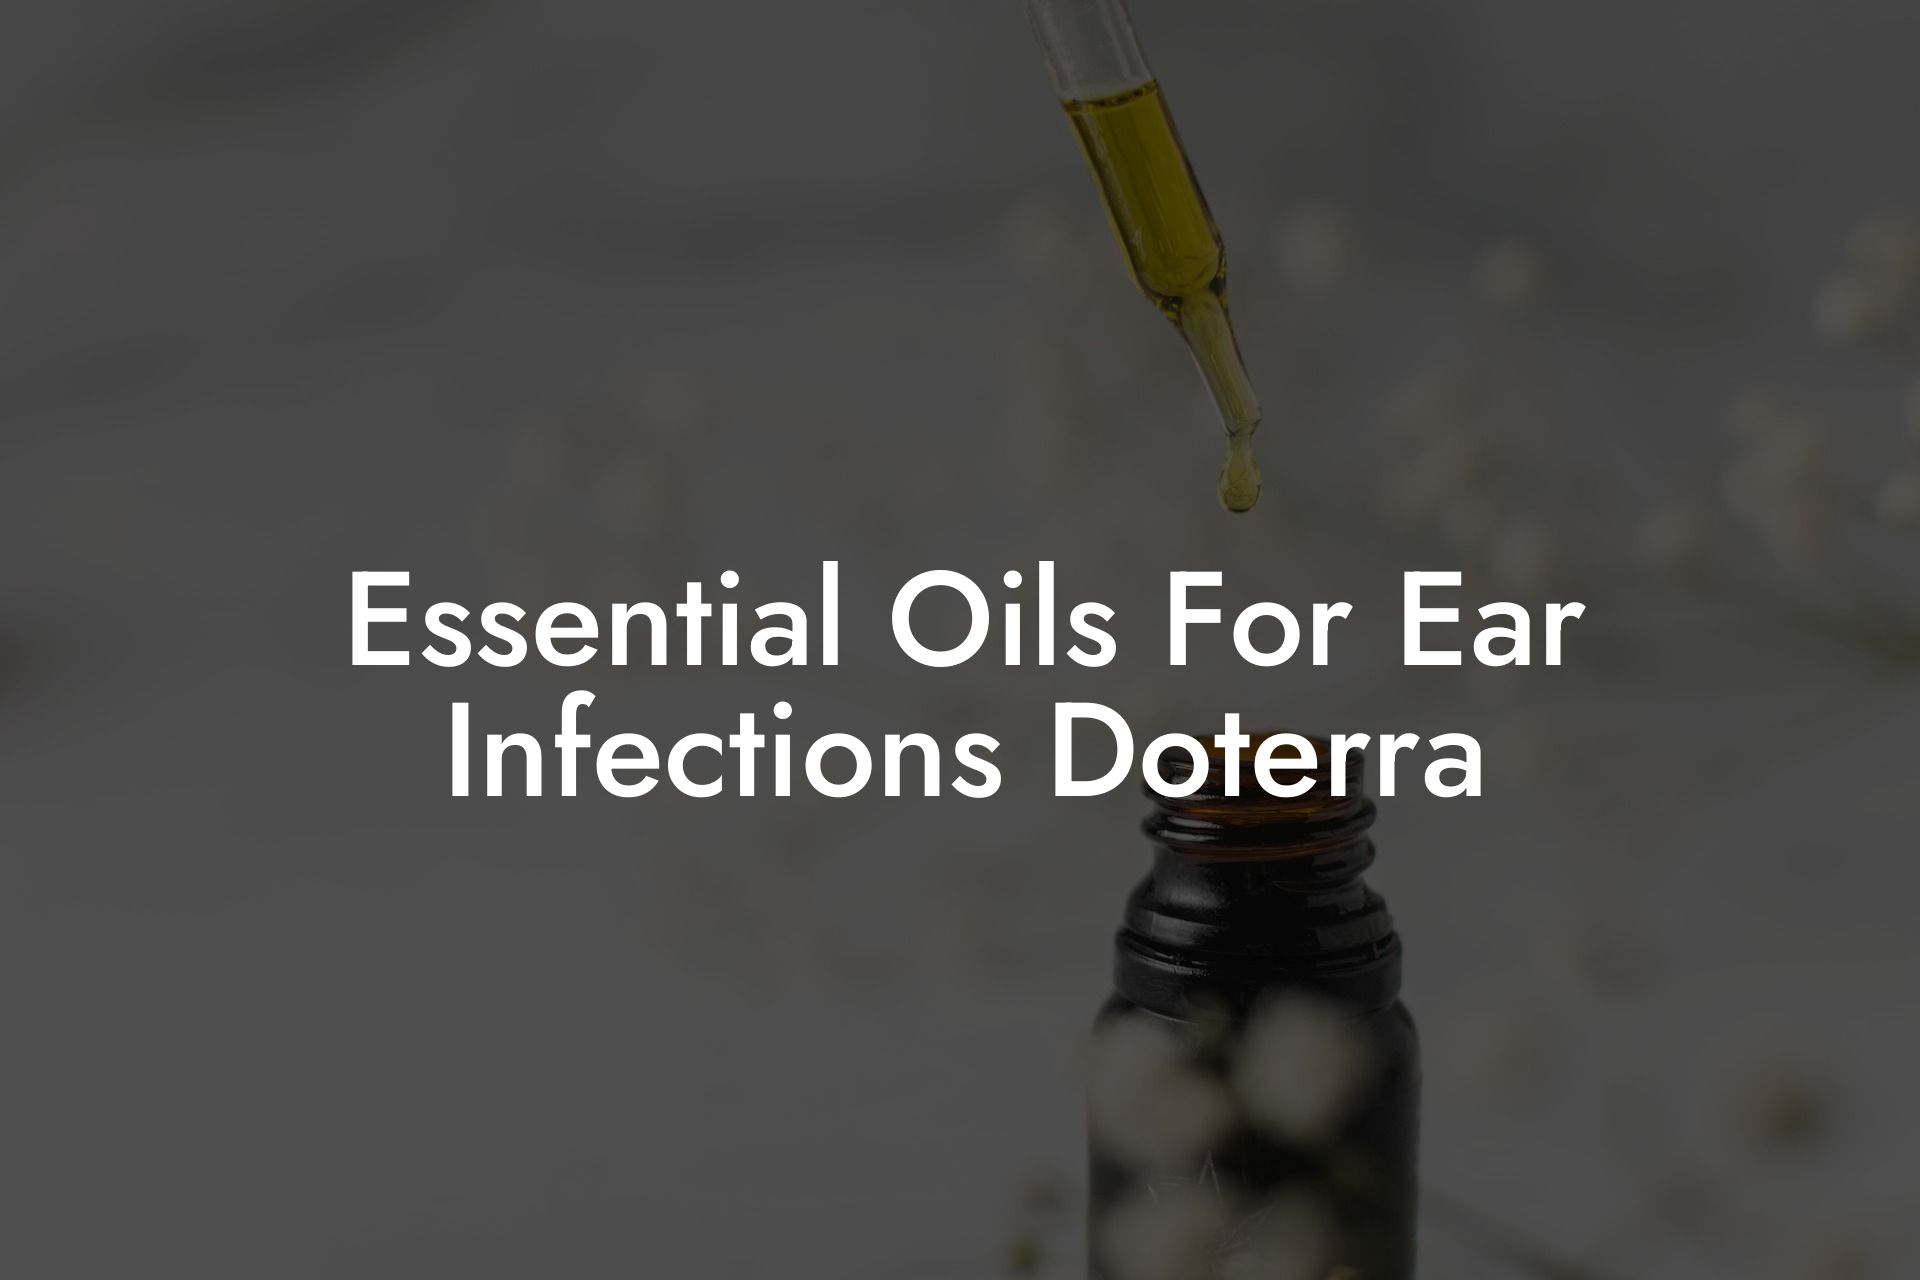 Essential Oils For Ear Infections Doterra